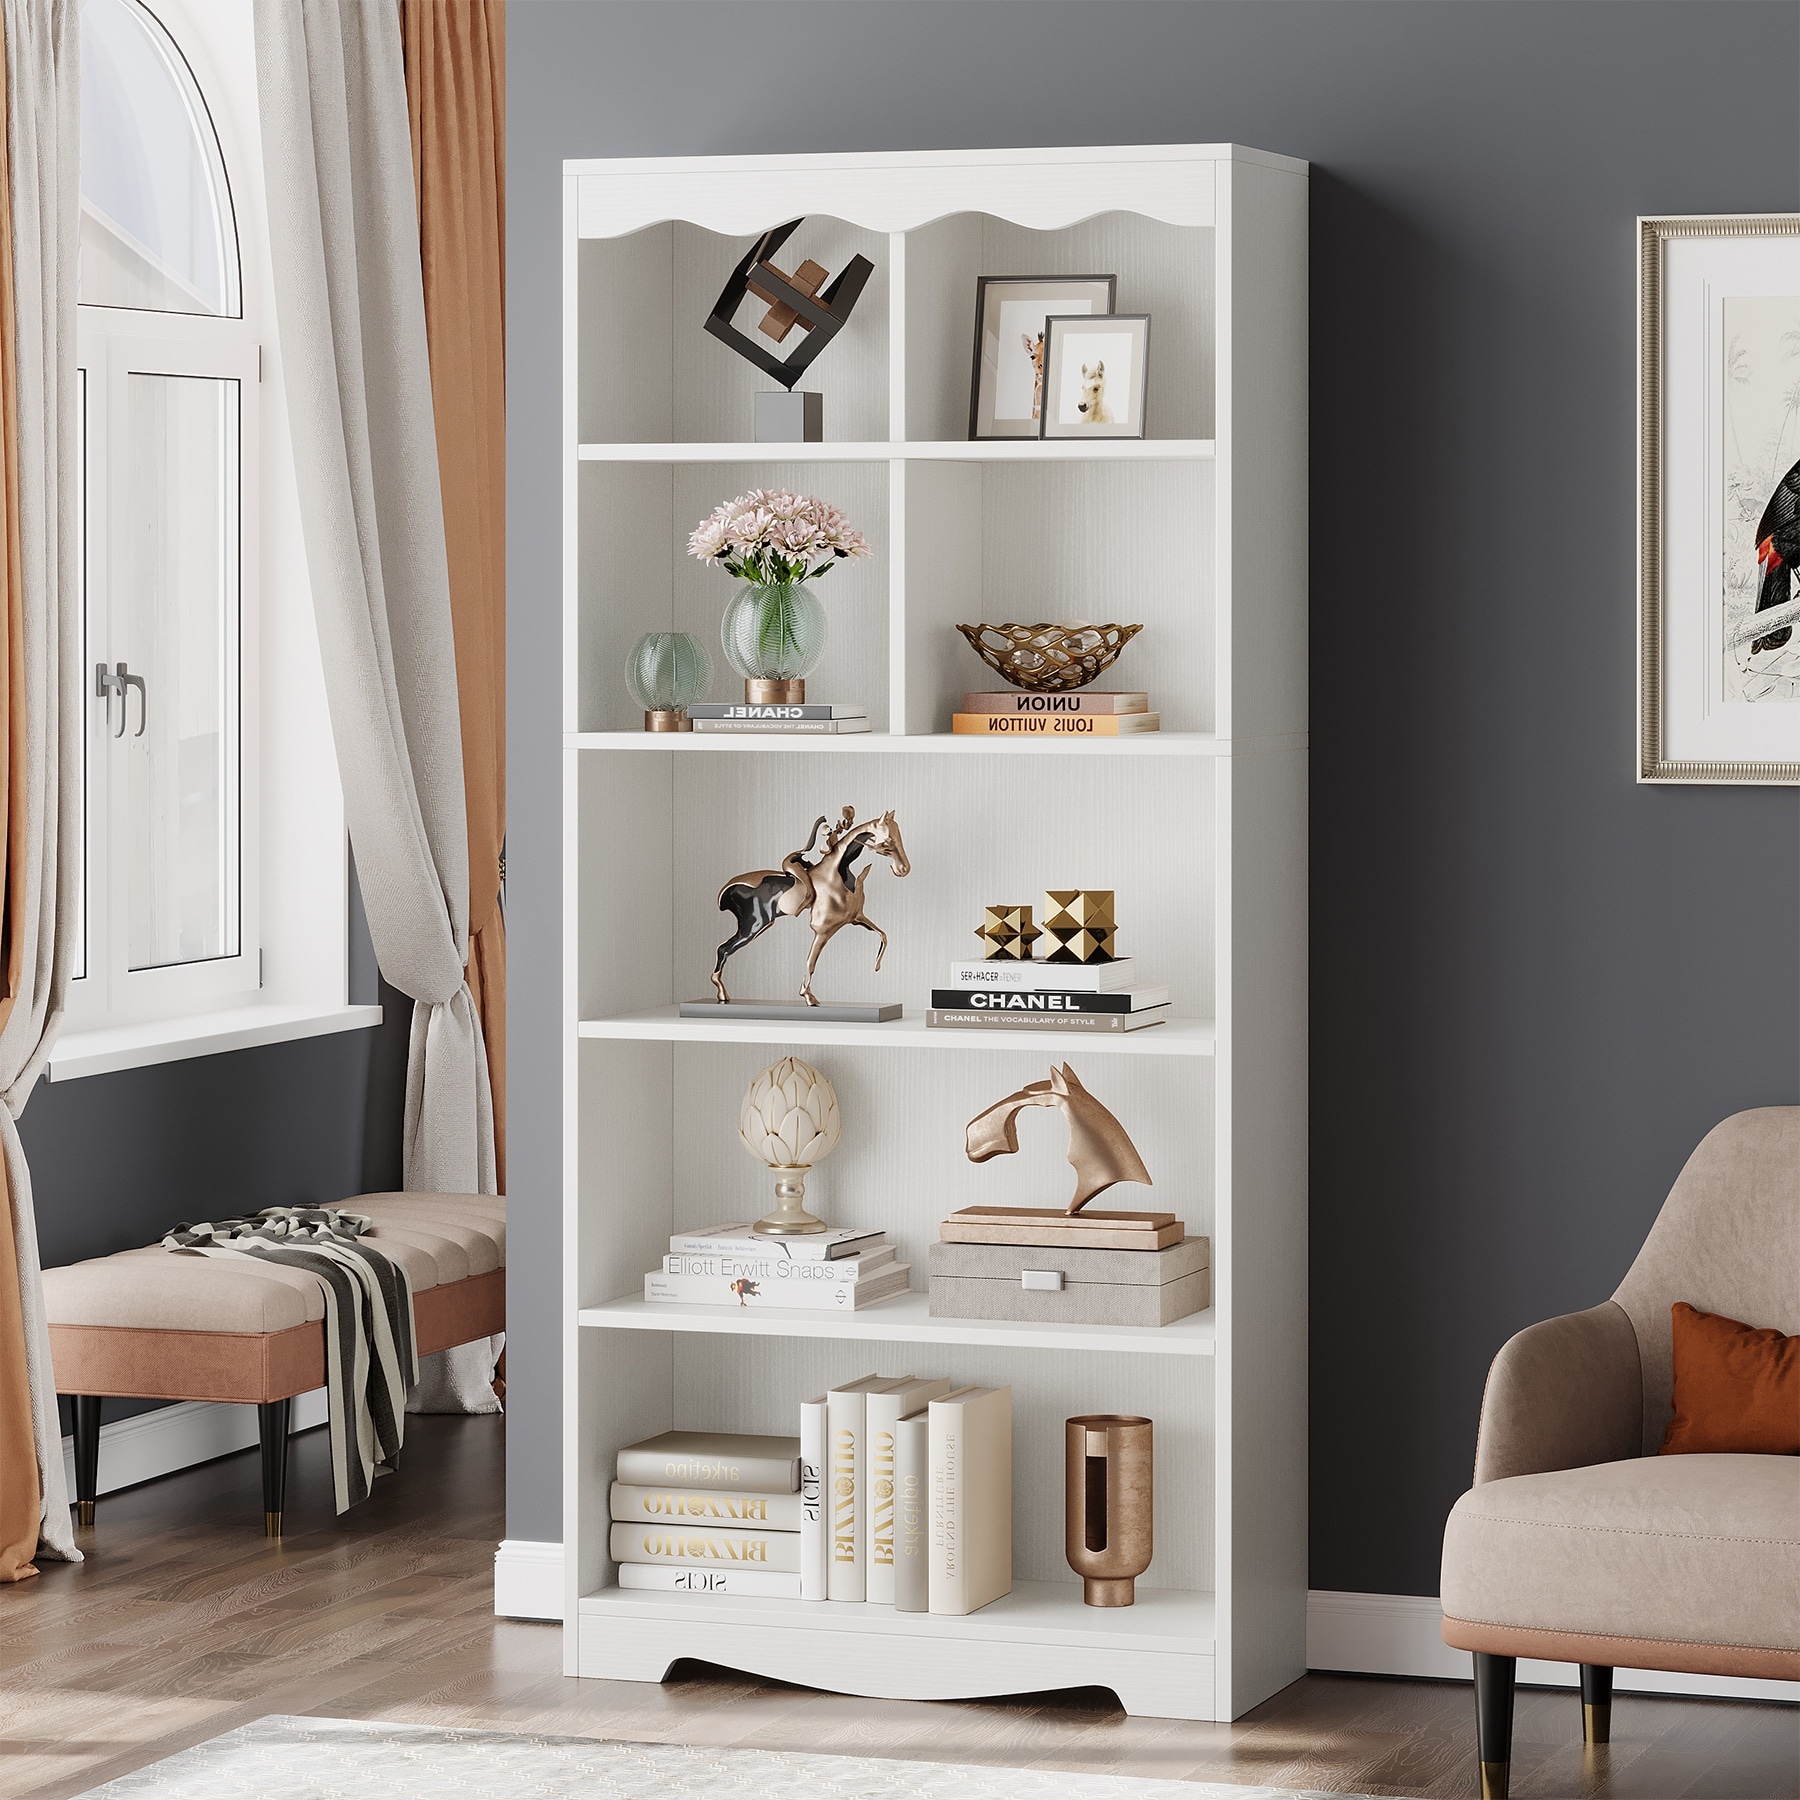 https://ak1.ostkcdn.com/images/products/is/images/direct/a0f2bf6016273be48992b937832414ad5463d232/70.86-Inch-Tall-Bookshelf-Modern-5-Tier-Wooden-Bookcase-with-Open-Storage-Shelves-for-Bedroom%2C-Living-Room-and-Office.jpg